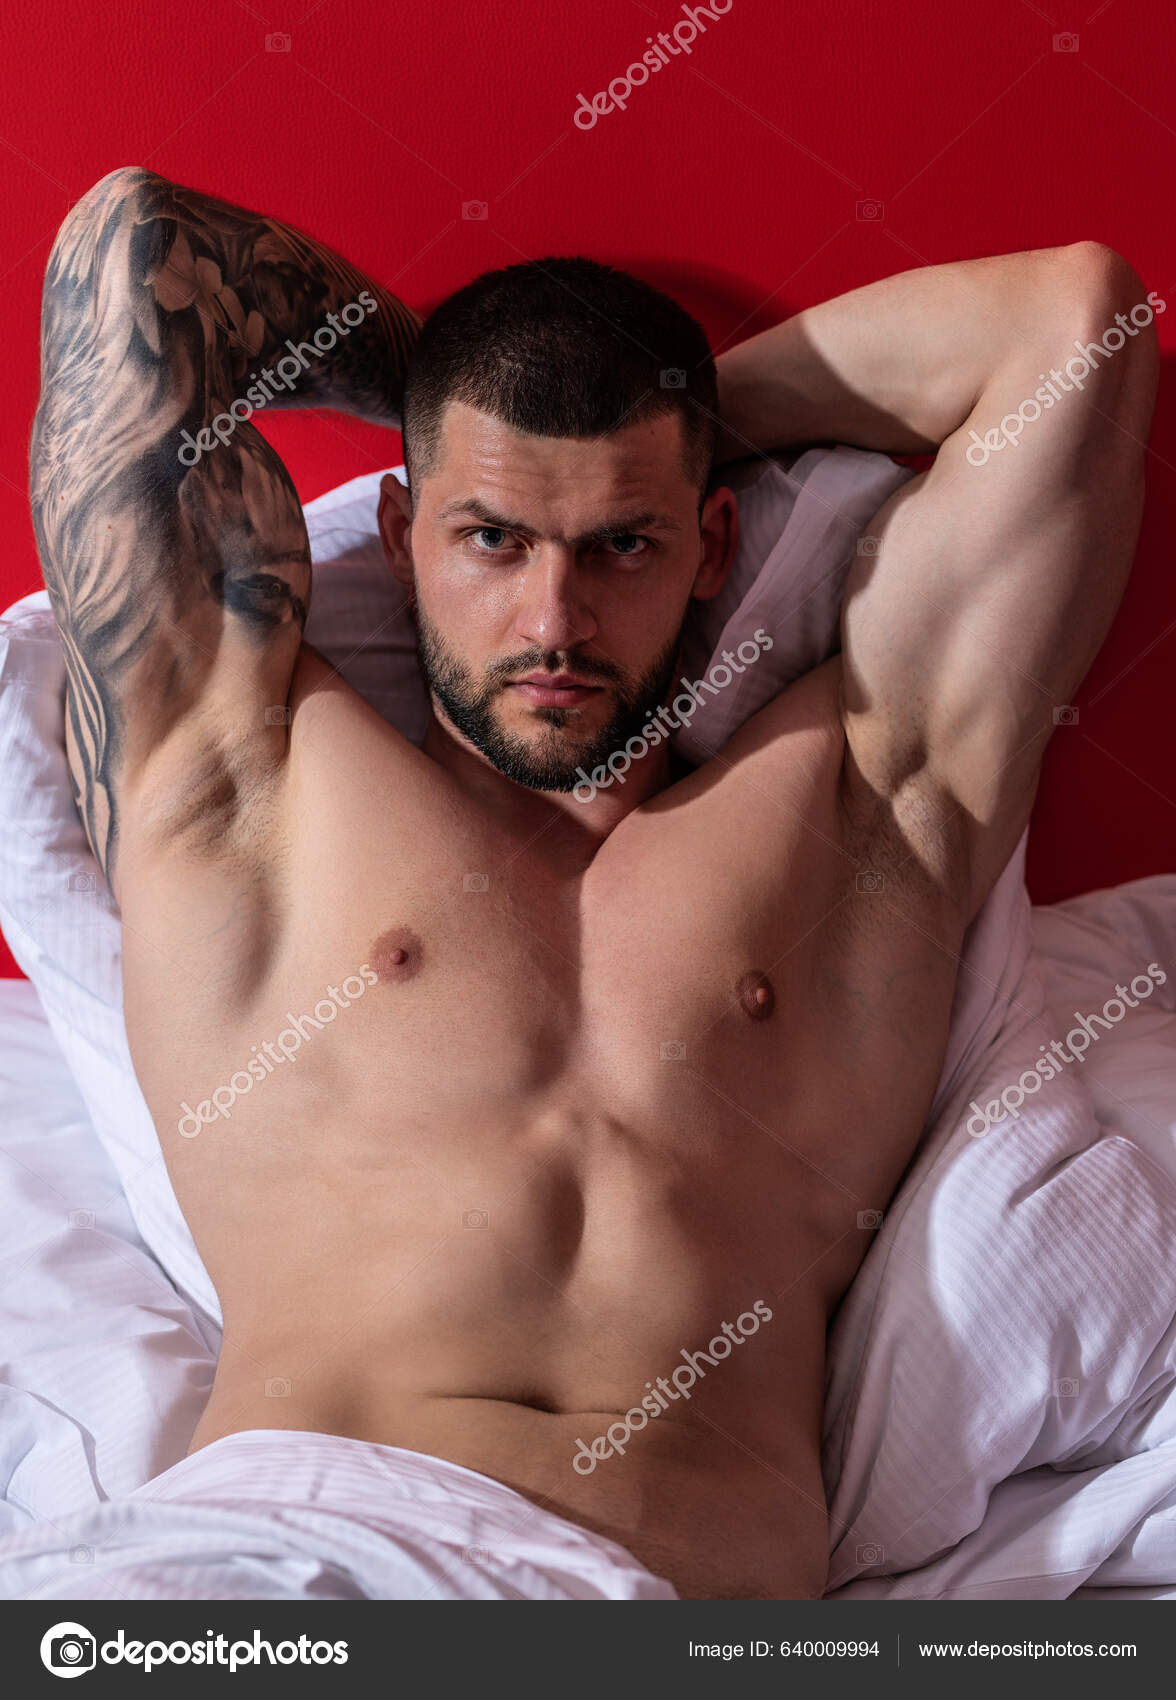 Sexy Naked Young Man Bed Nude Male Body Sexy Model Stock Photo by  ©Tverdohlib.com 640009994